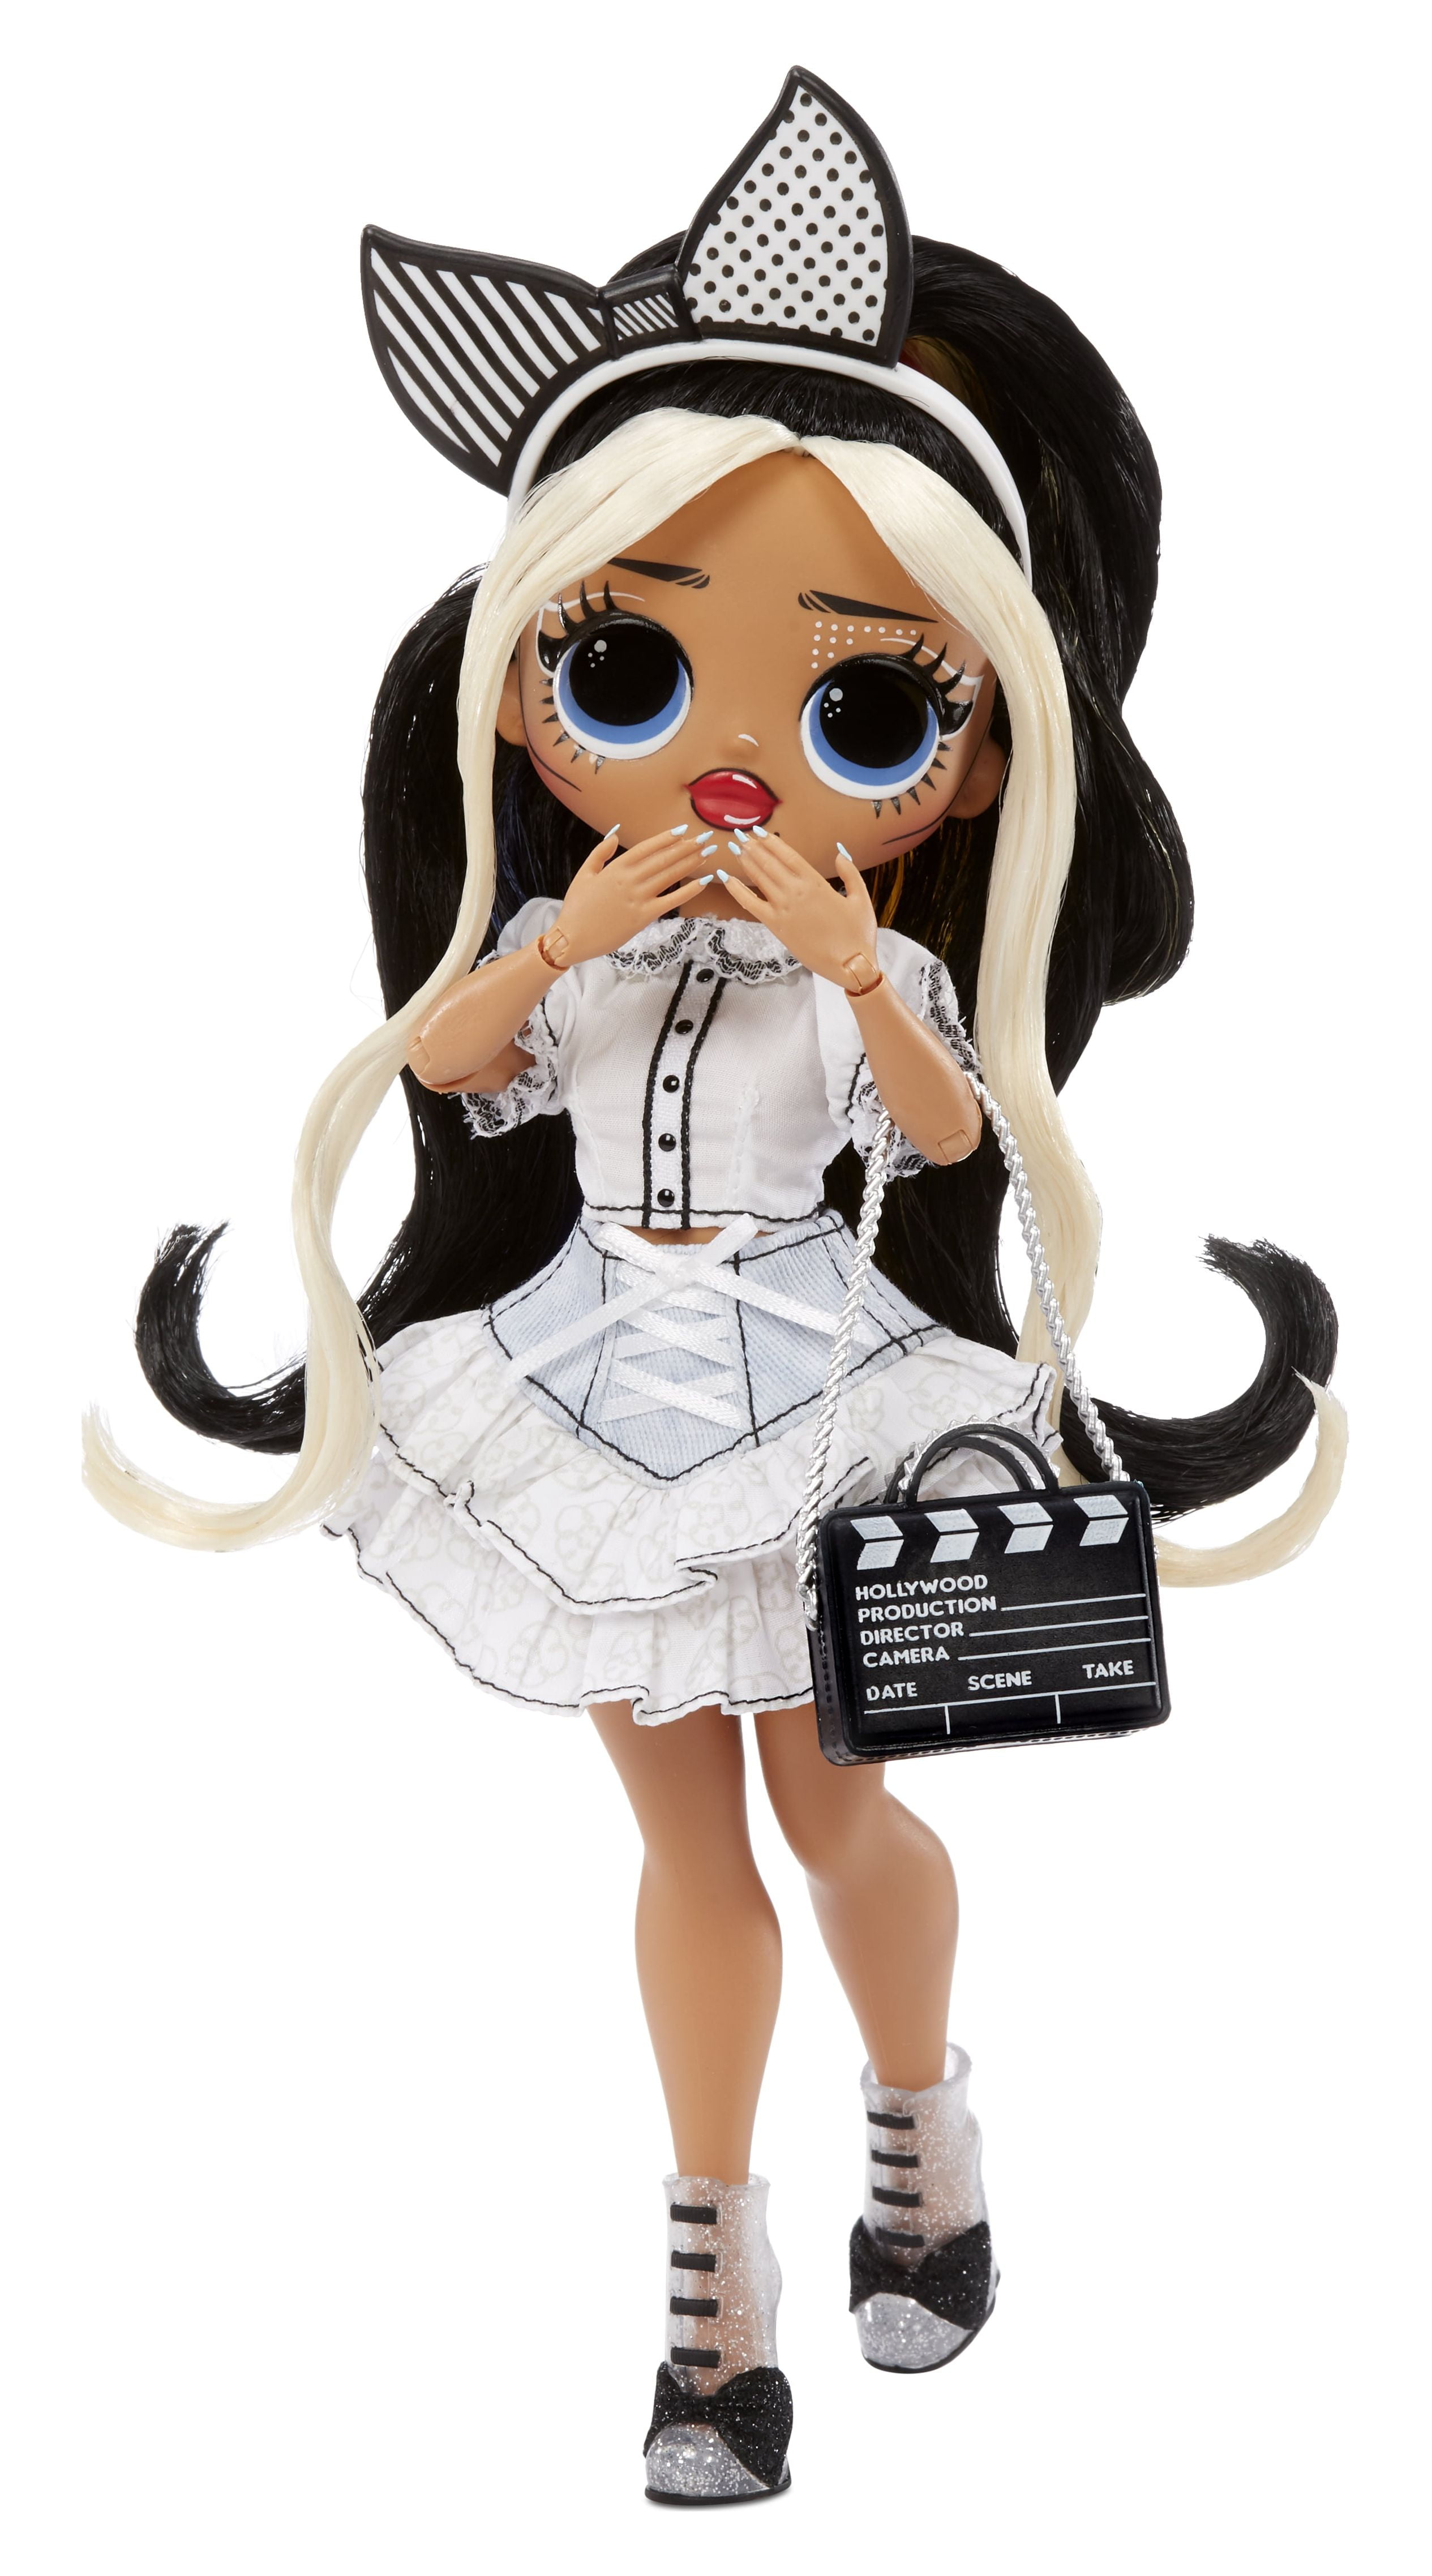 Lol Surprise OMG Movie Magic Ms. Direct Fashion Doll with 25 Surprises